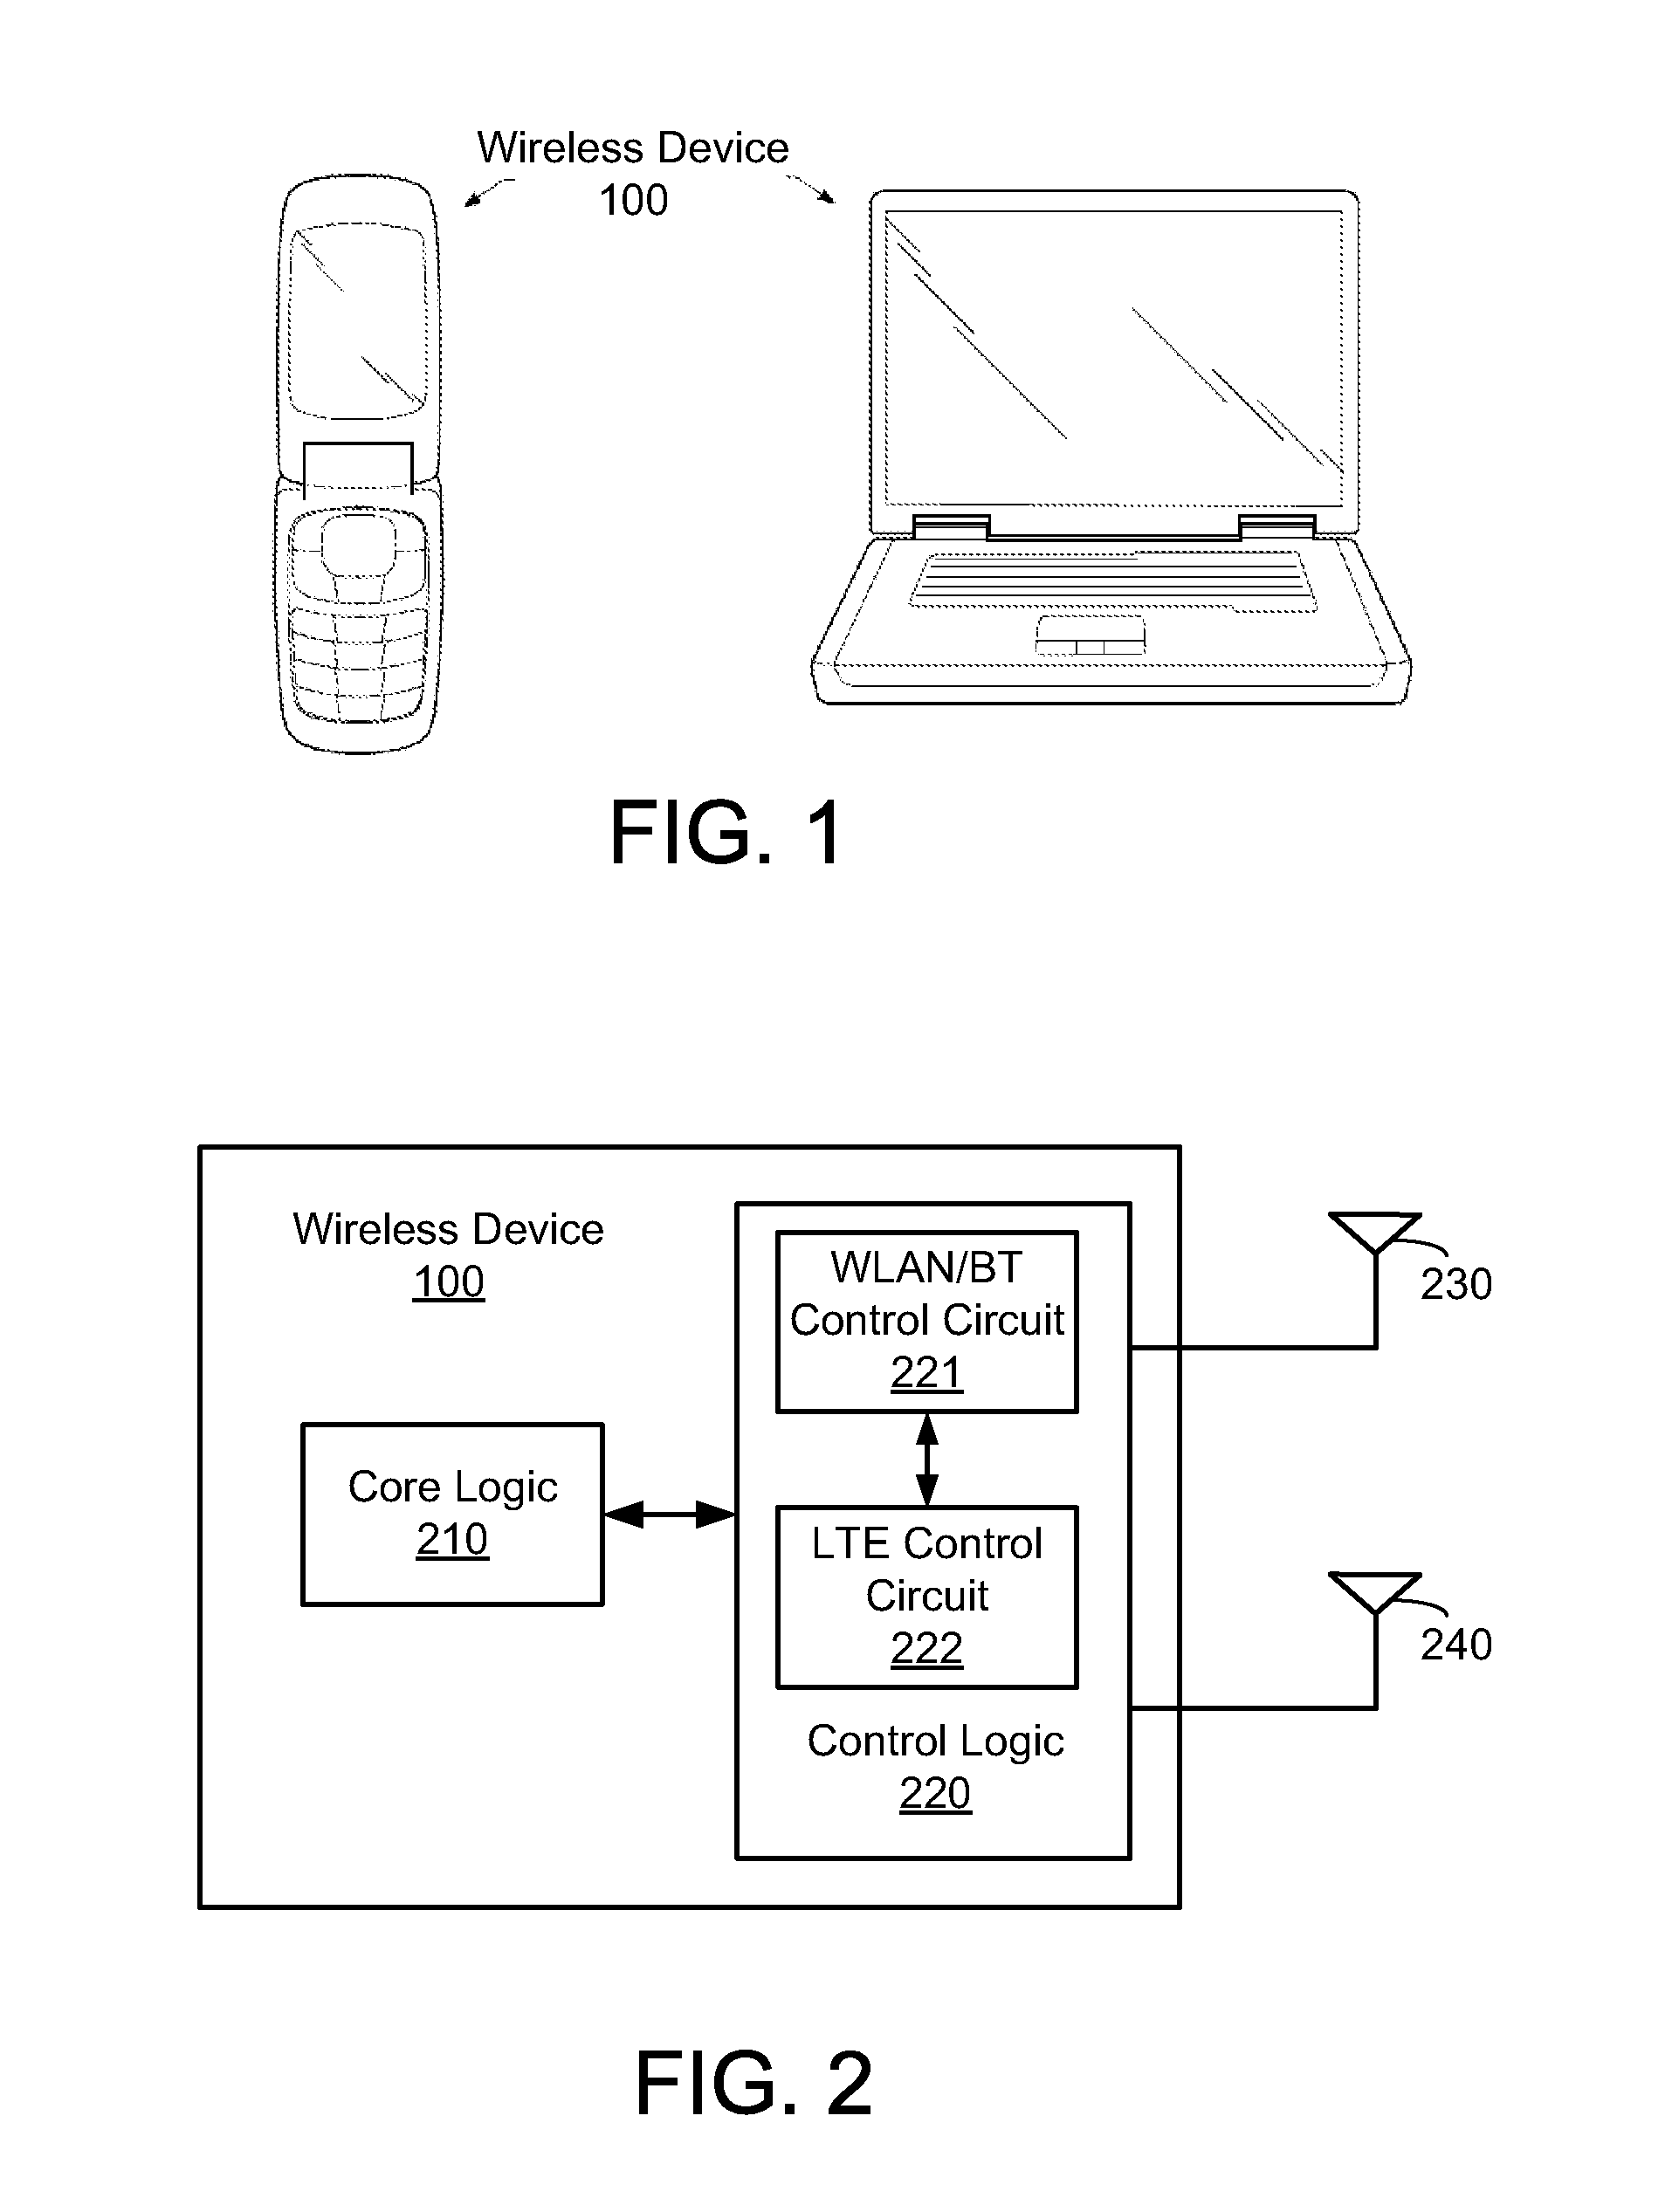 Per-packet rate and power control for wireless communications